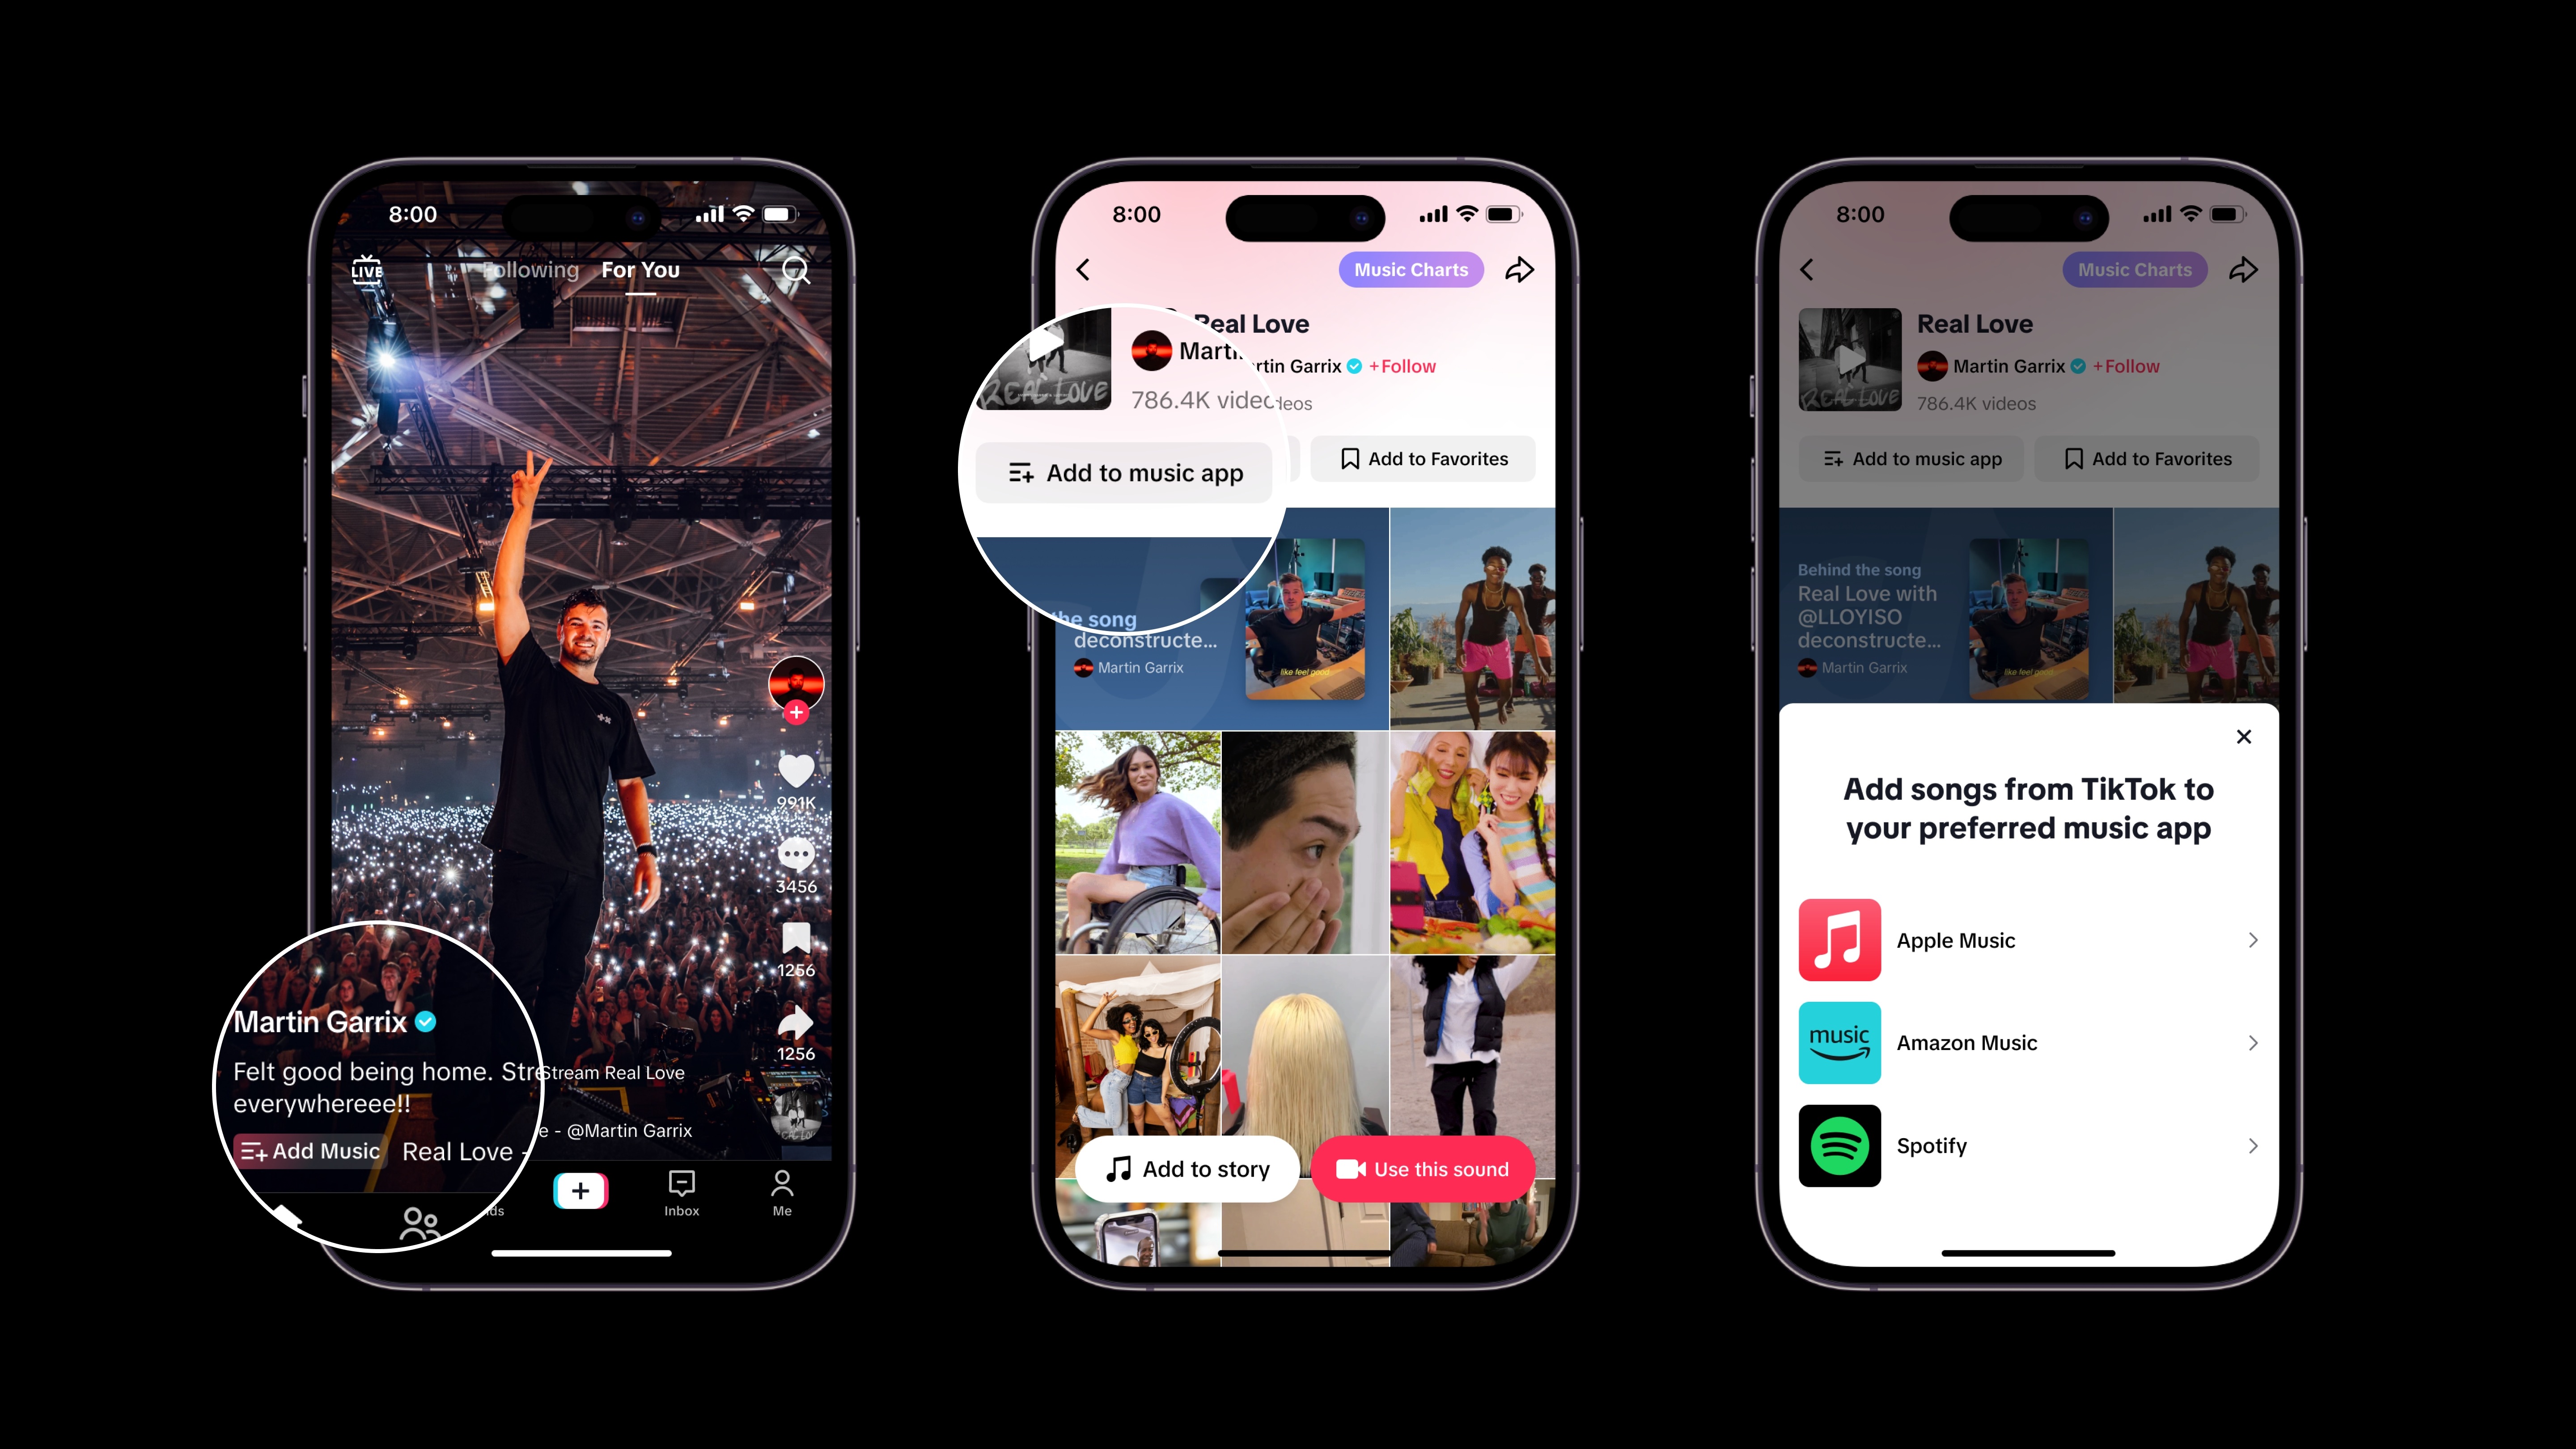 You can now add songs on TikTok to Apple Music, Spotify or Amazon Music playlists